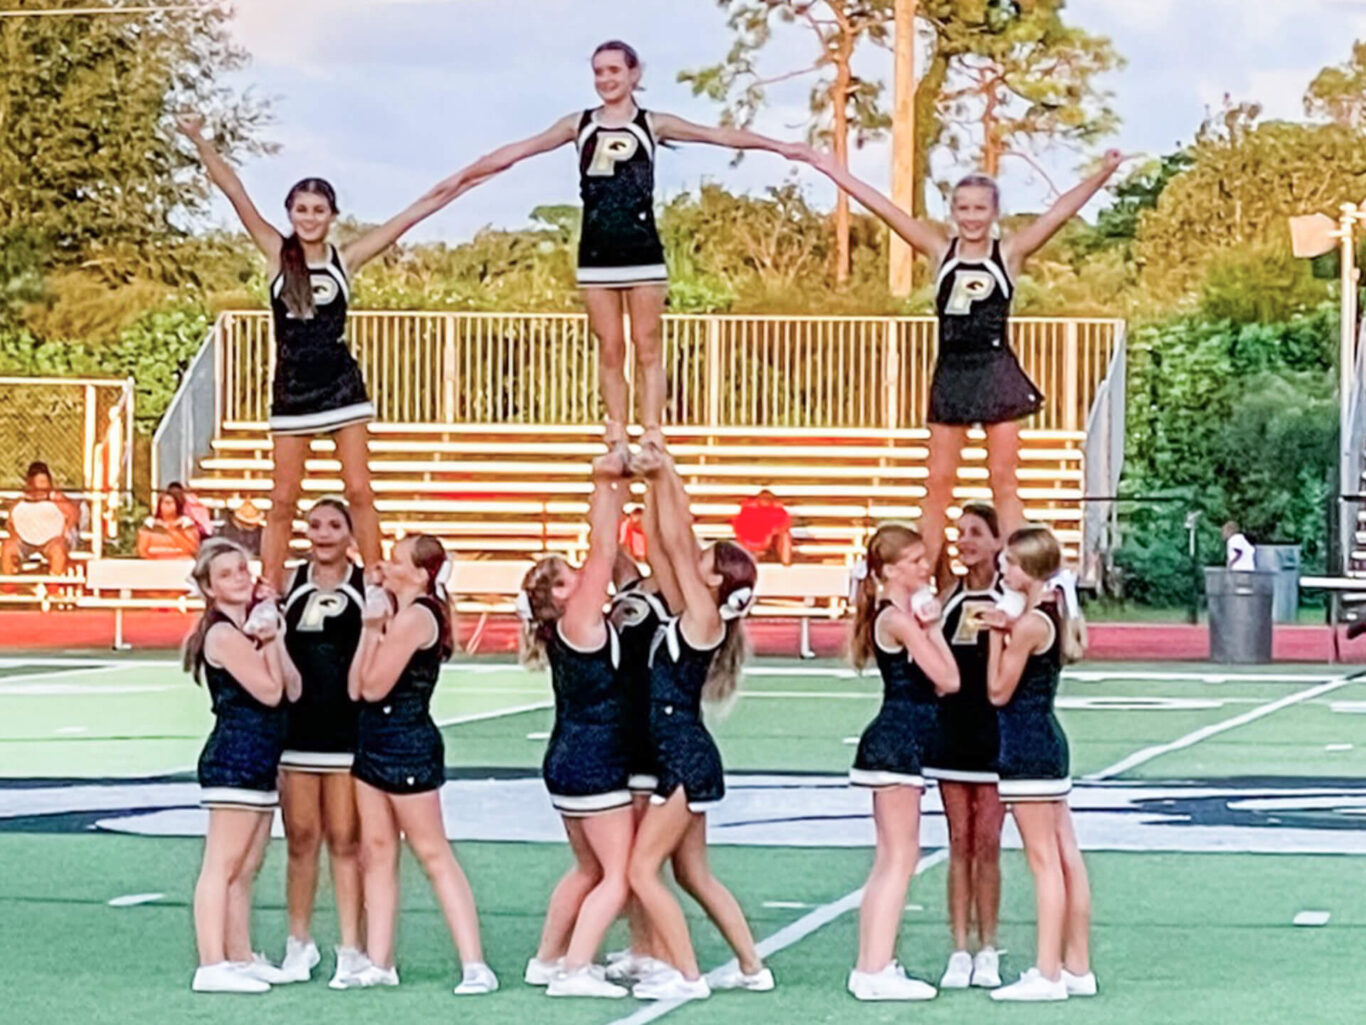 Competitive cheerleaders performing on a football field.